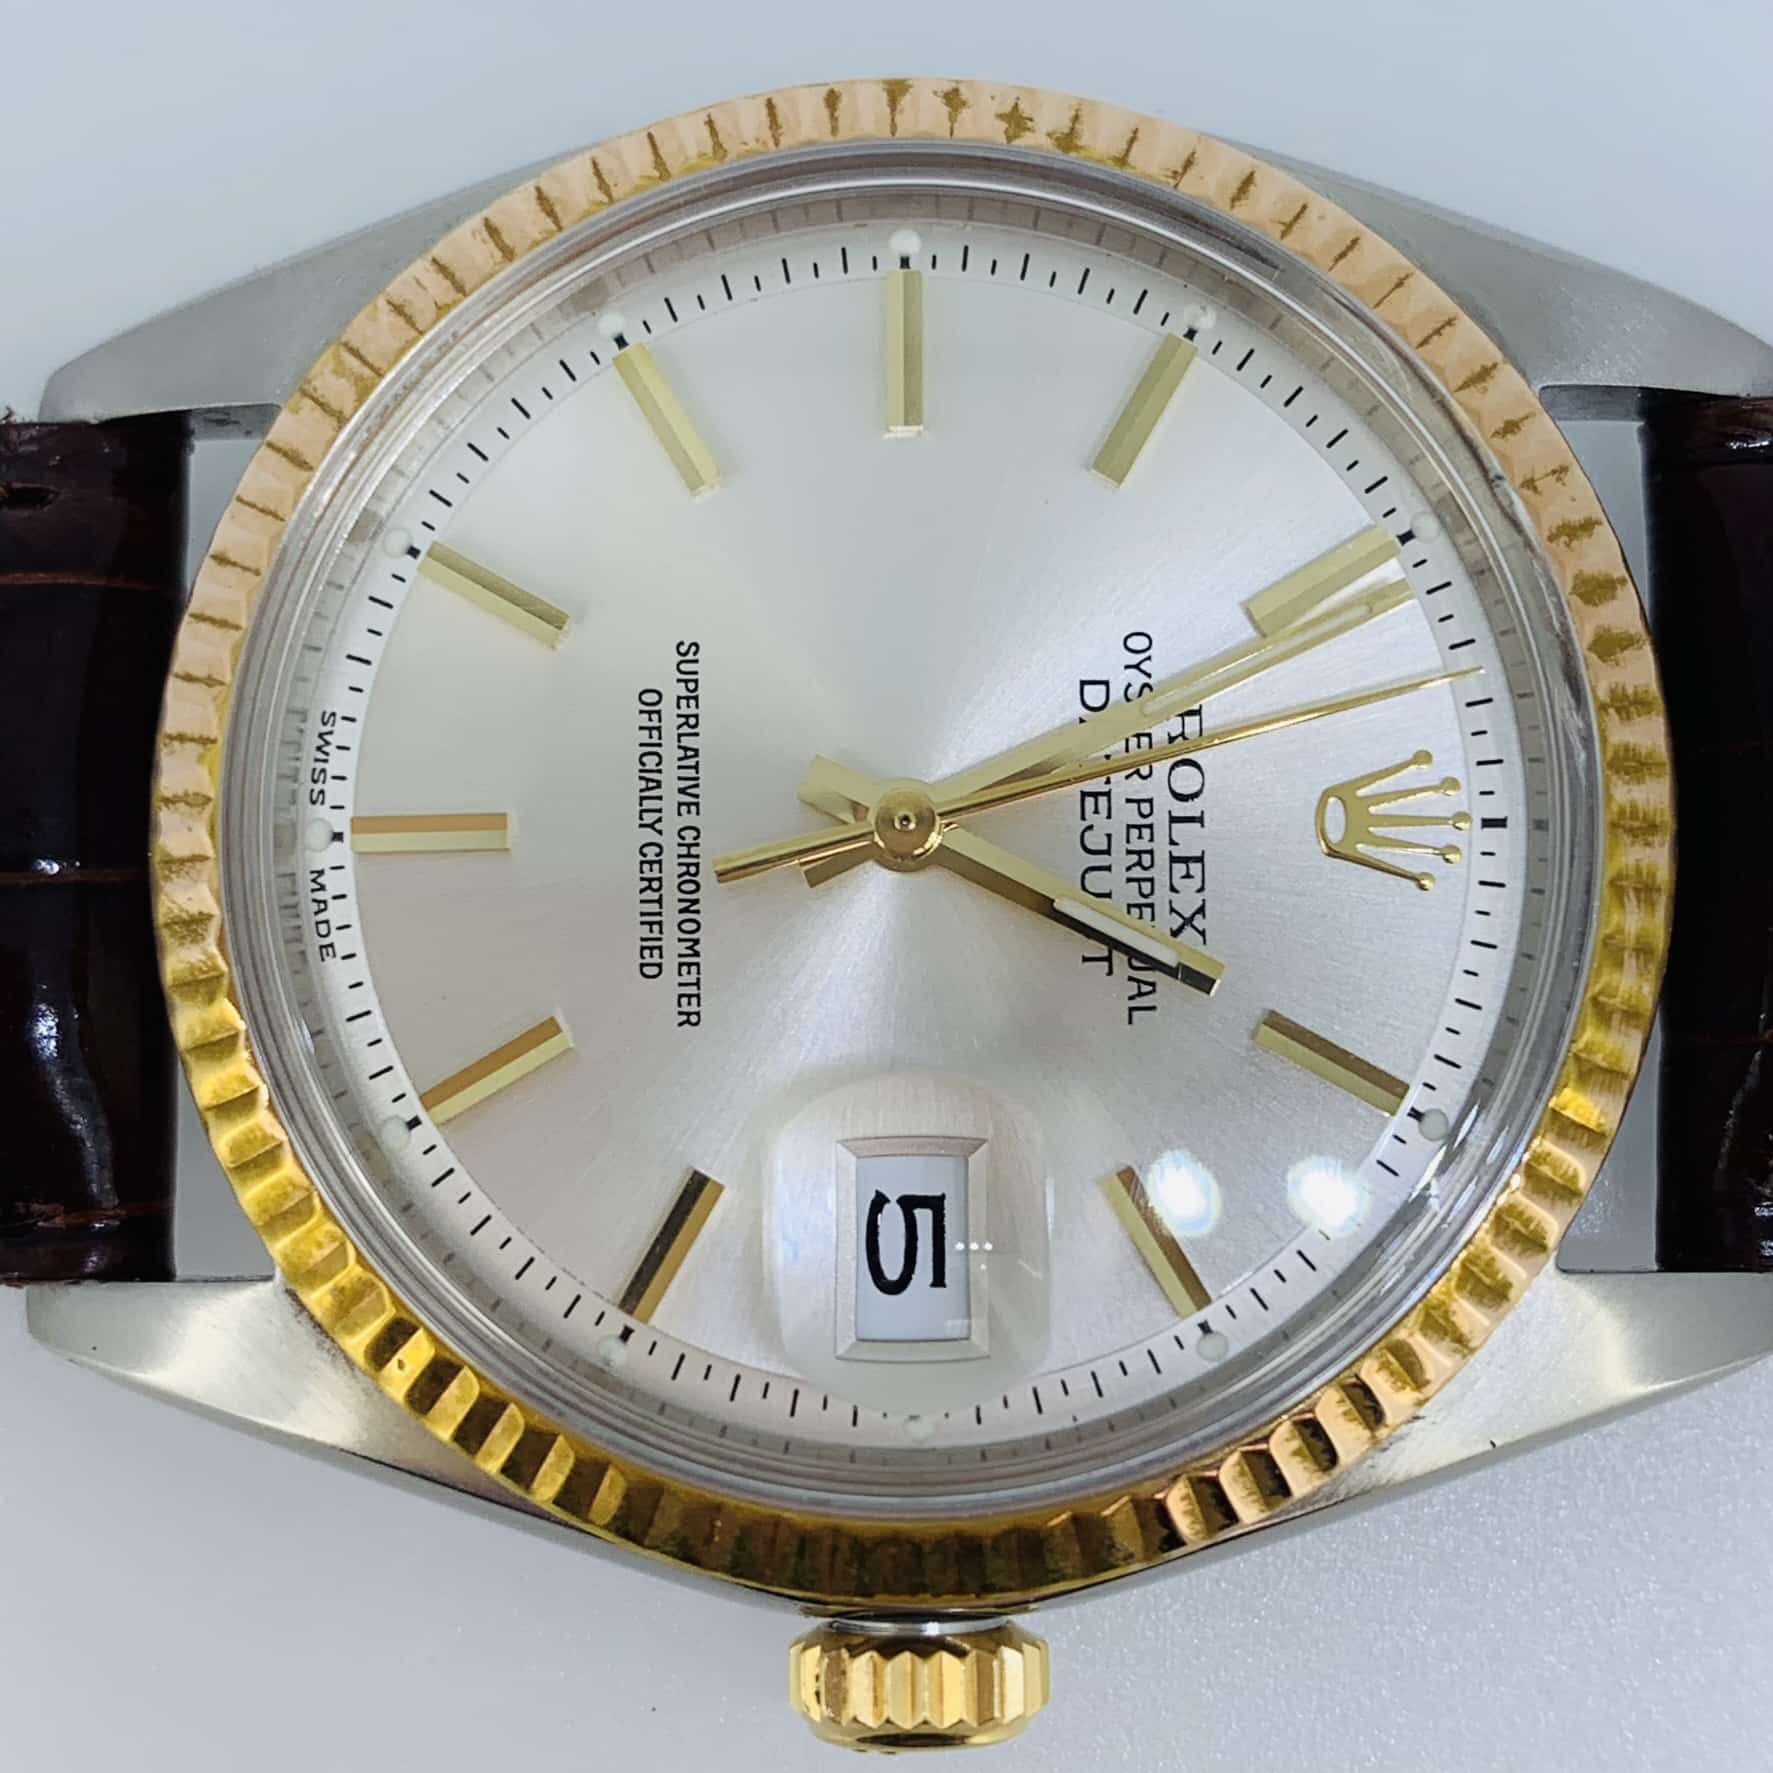 Montre Rolex Oyster Perpetual Date 1970